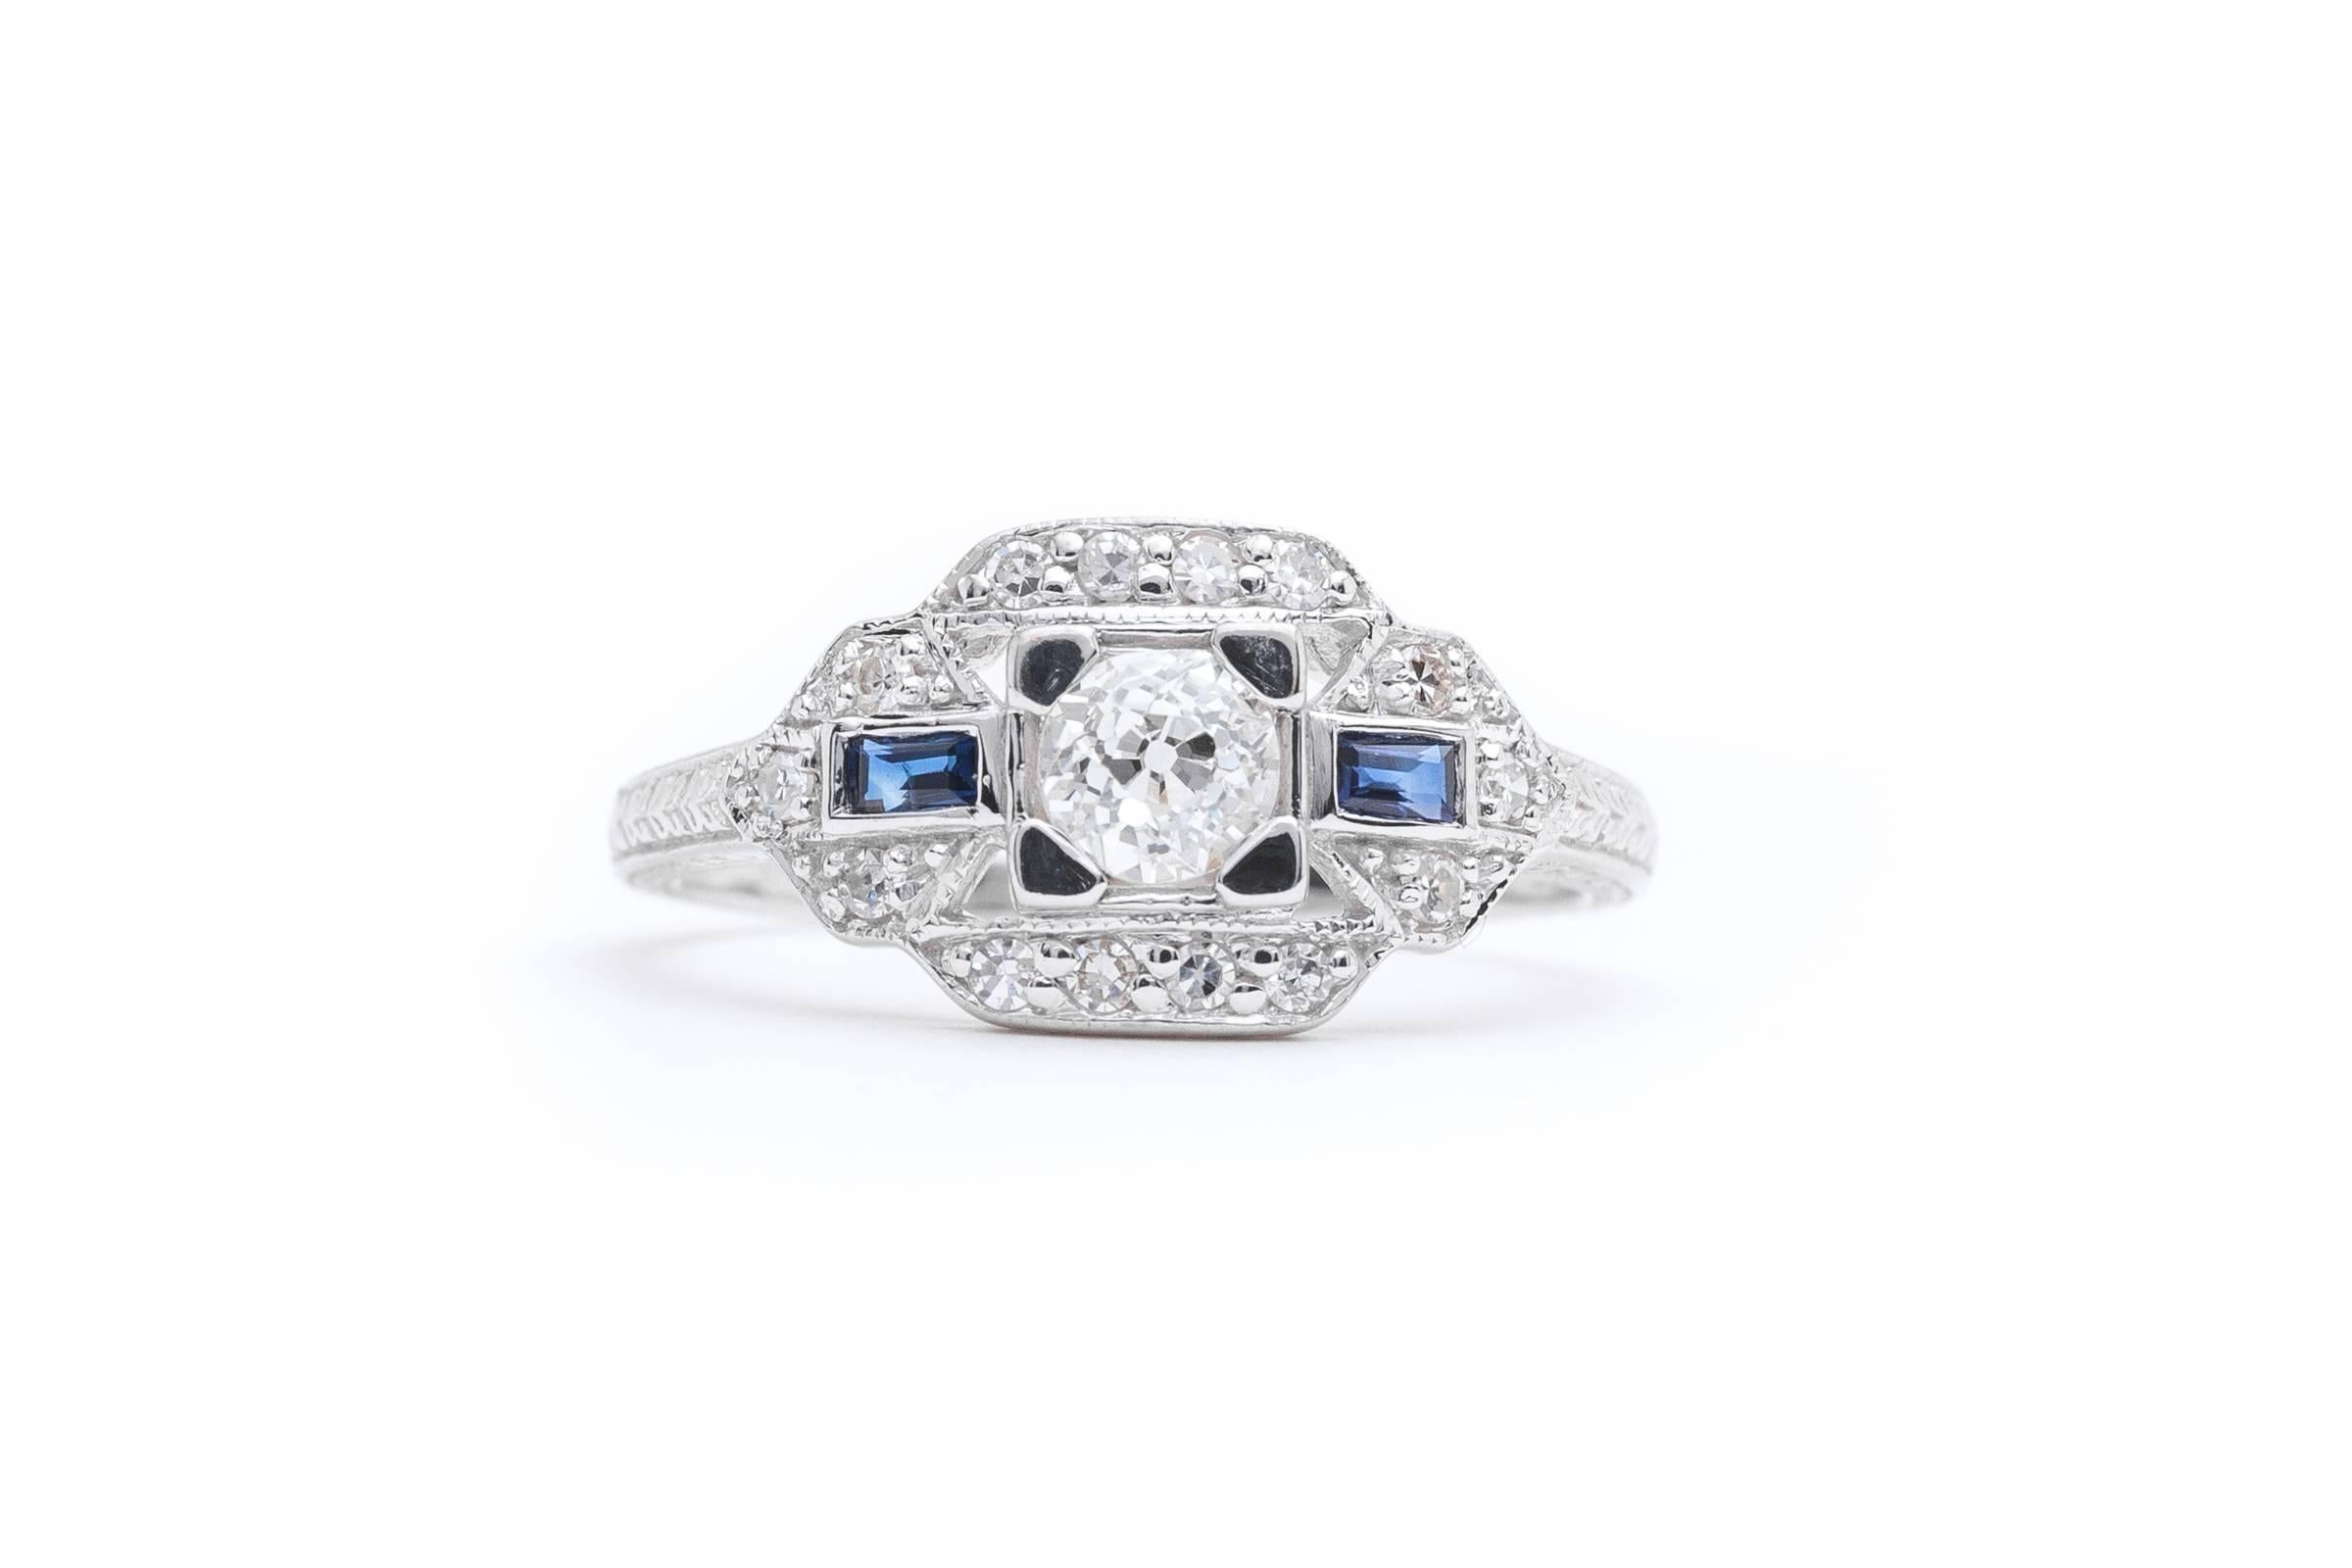 Beacon Hill Jewelers presents:

A beautiful hand engraved diamond and sapphire ring in 14 karat white gold. Centered by a sparkling antique old European cut diamond of 0.42 carats this ring features antique single cut diamonds set throughout, as